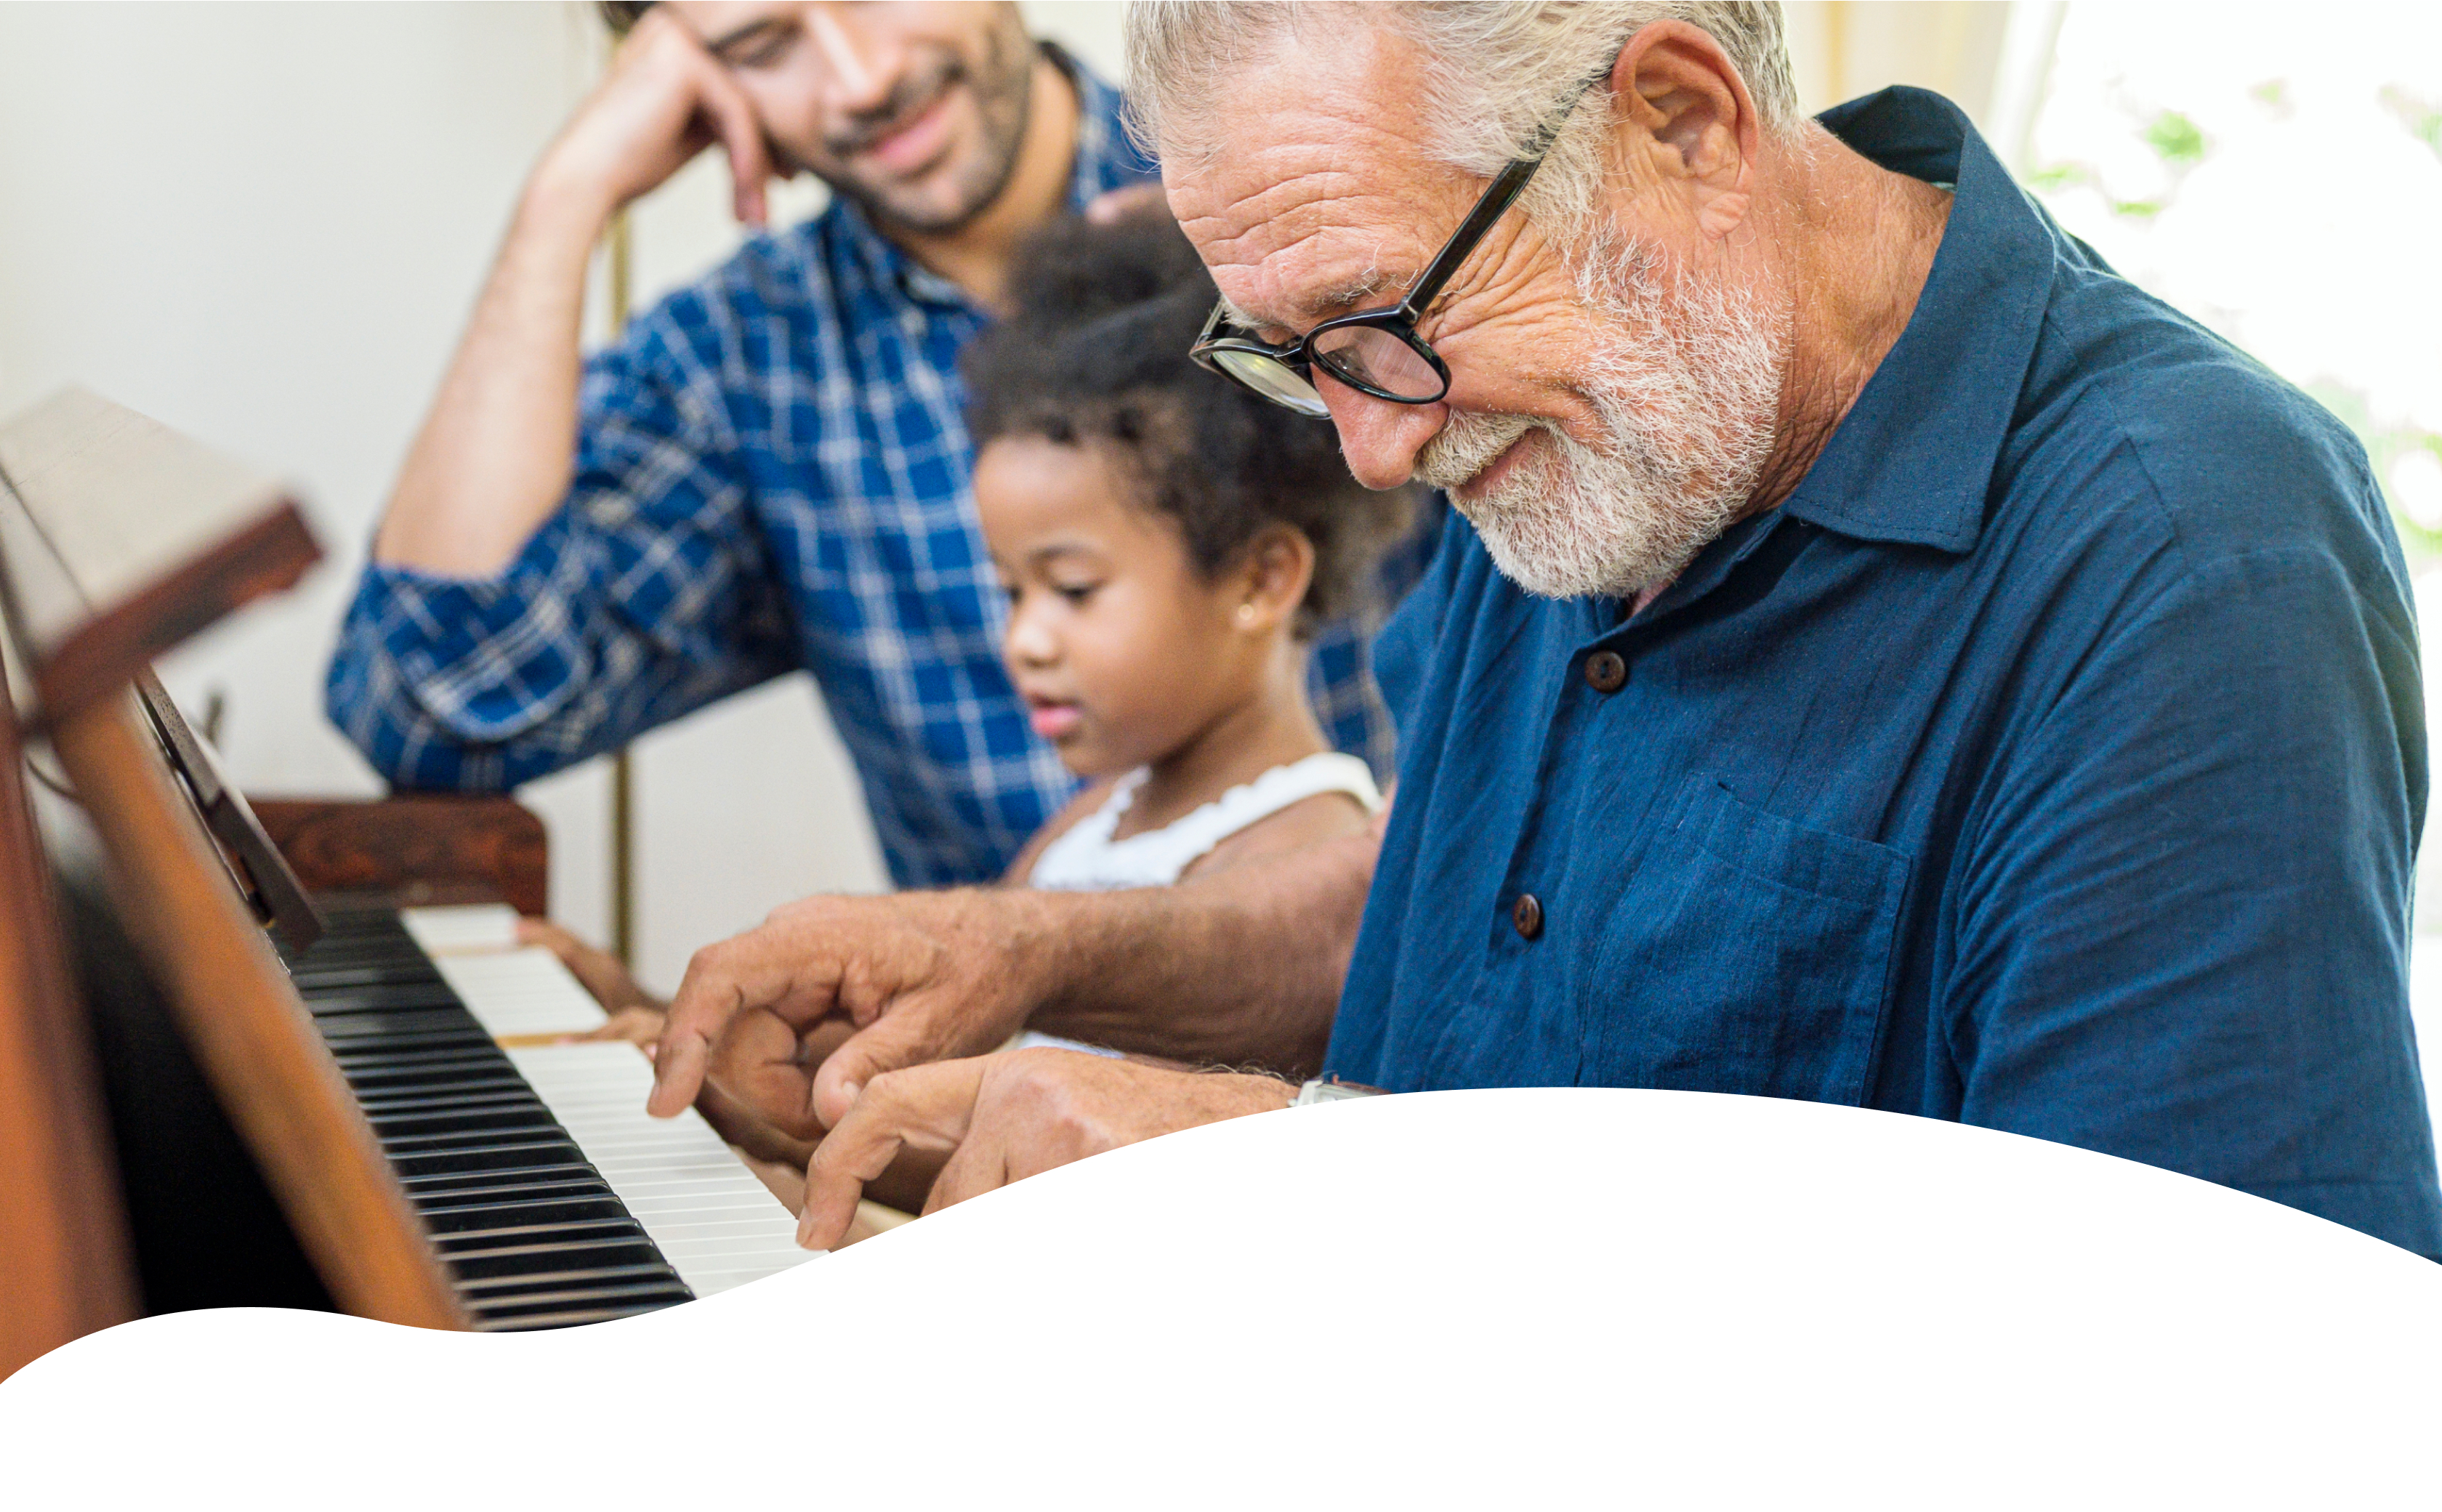 Smiling 55+ man with a child and a younger man at a piano